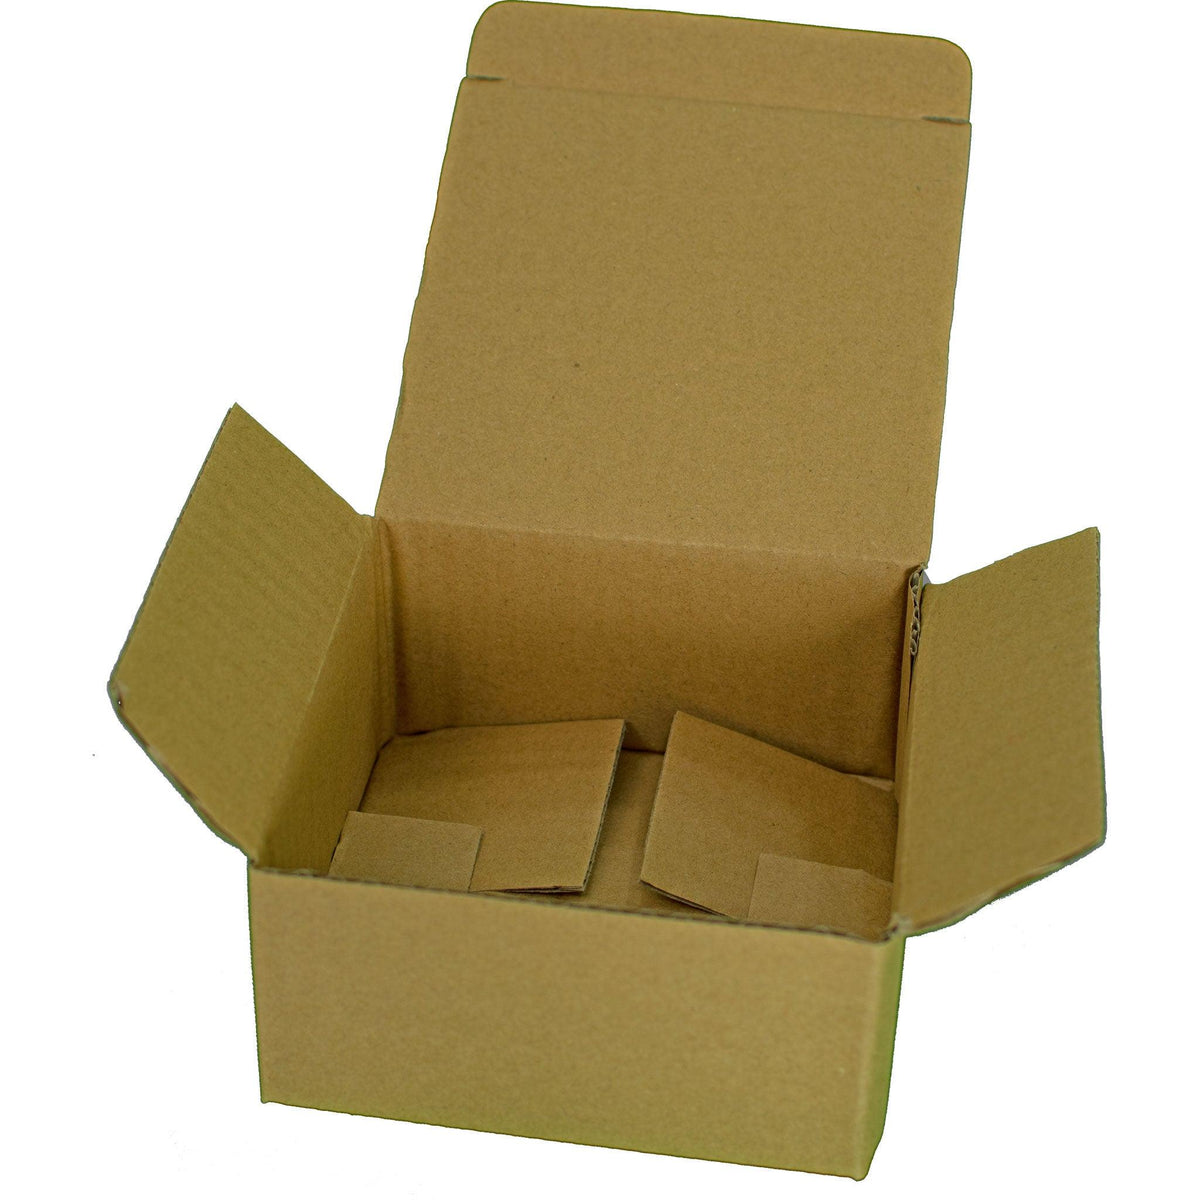 Purchase brand new empty Cardboard Boxes for your C-7 Light Bulbs from Lee Display.    Organize your holiday lights, store your bulbs safely, and keep them safe from water damage.  On sale now at leedisplay.com